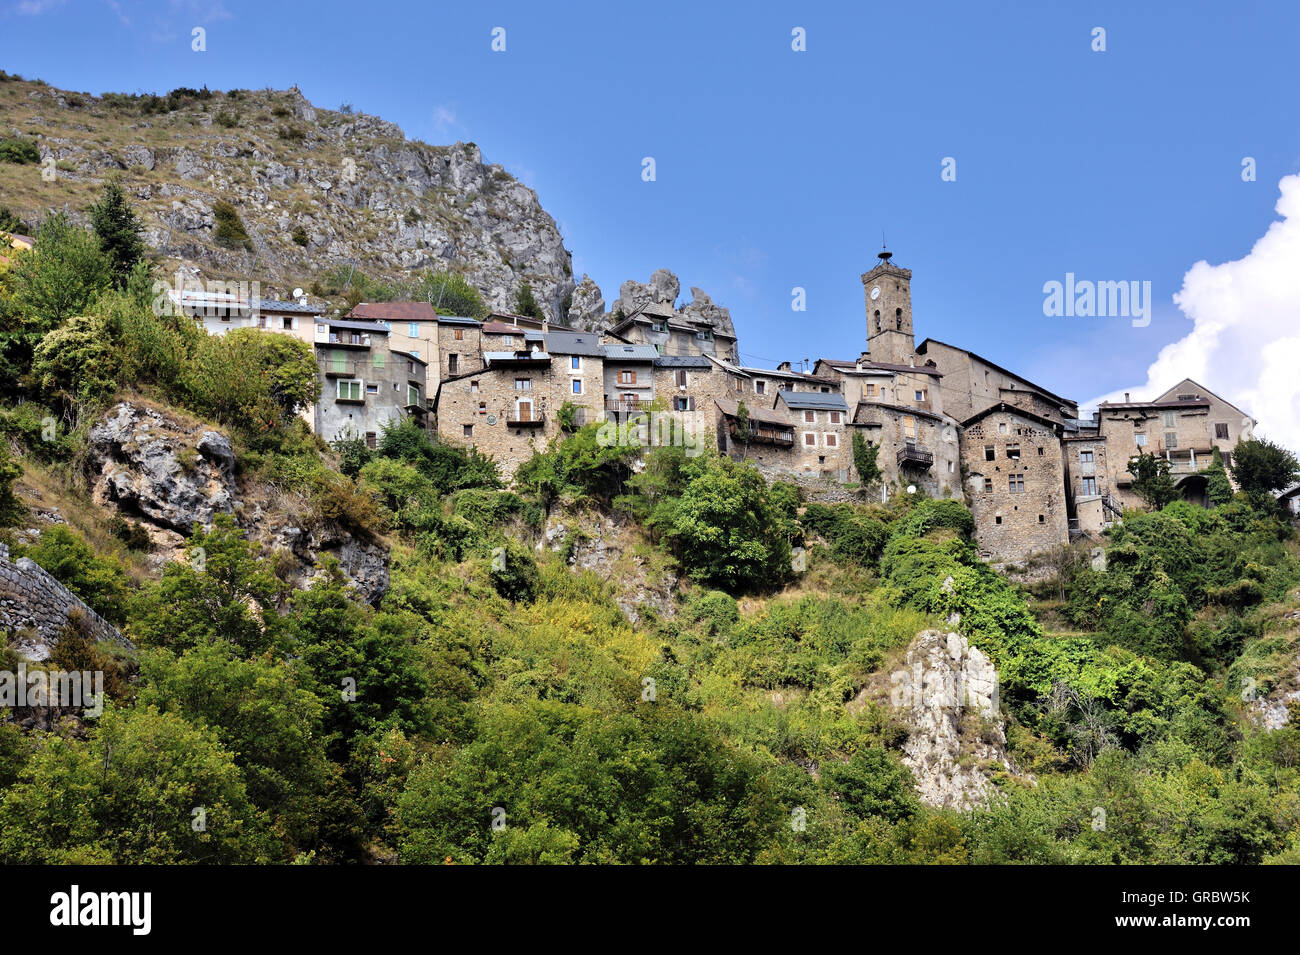 Roubion, Village Of The French Alps, Embedded In Landscape, France Stock Photo